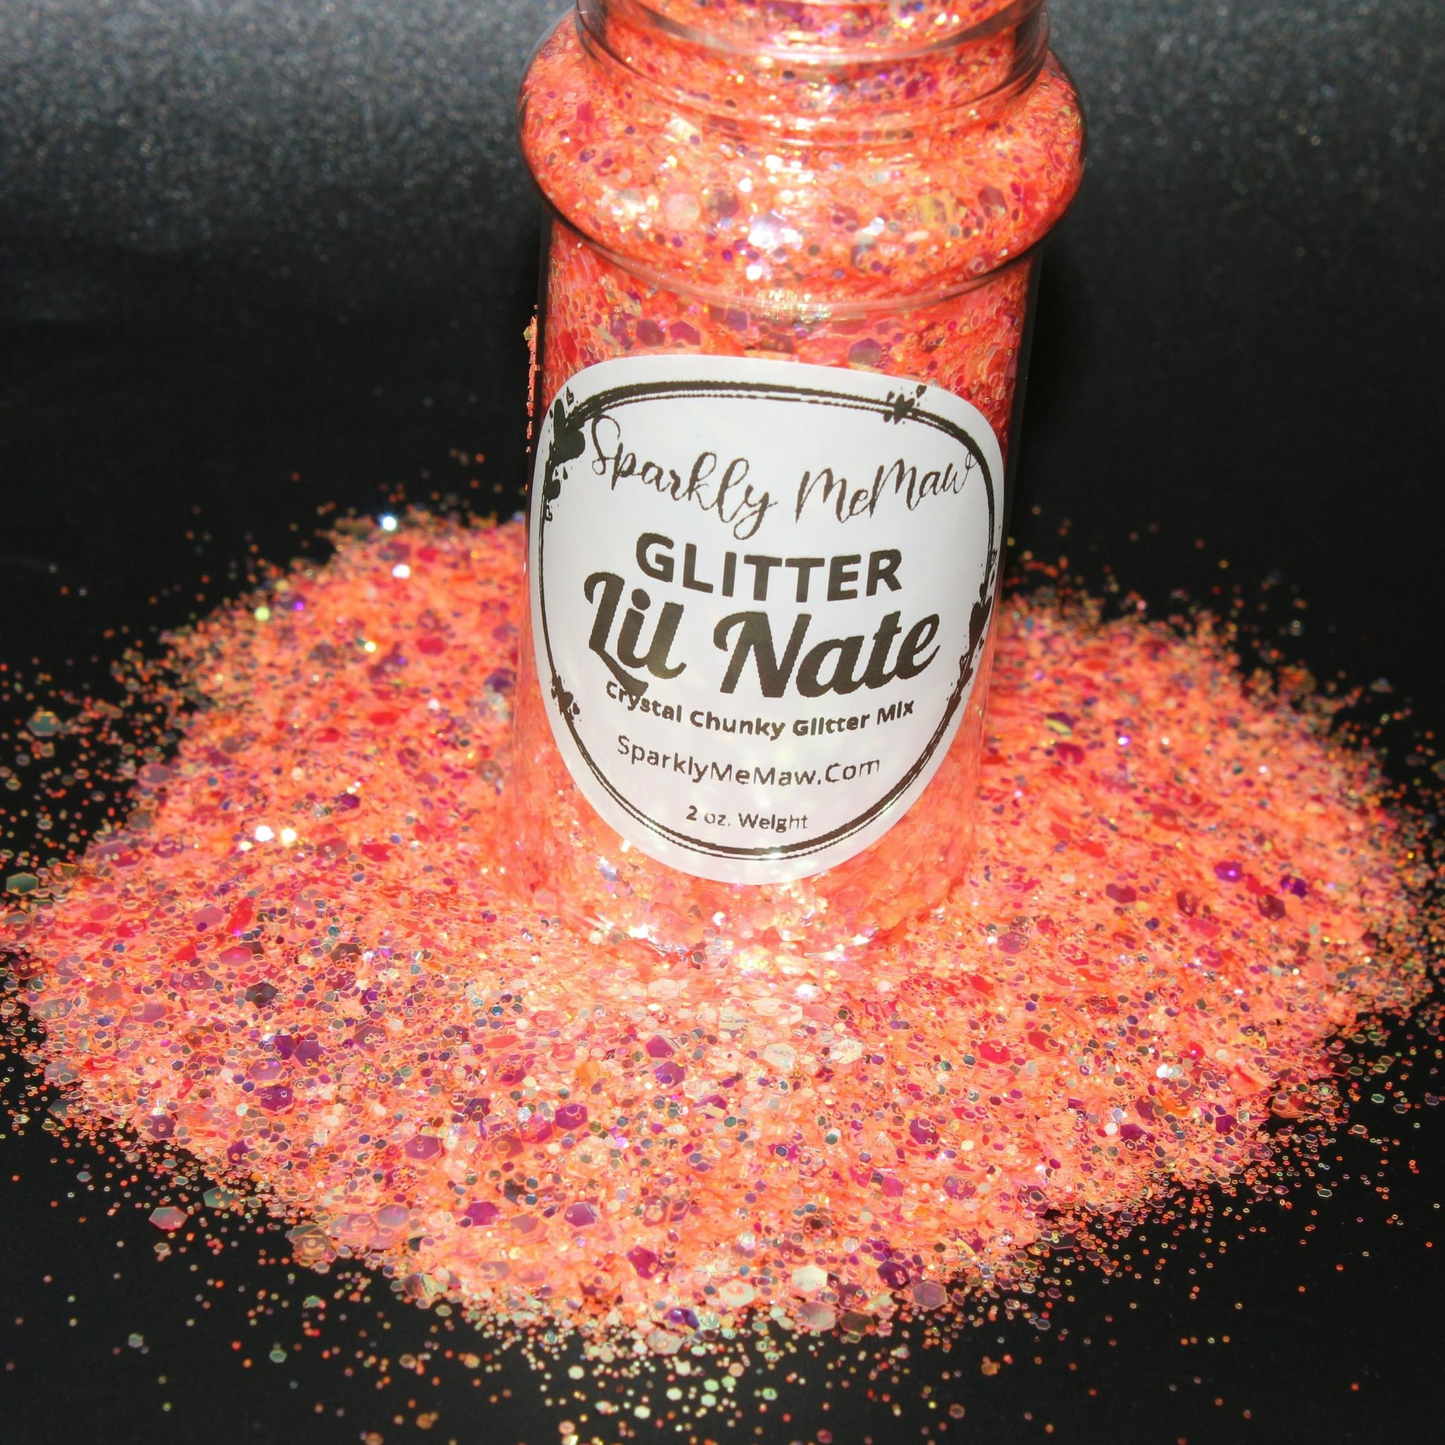 Lil' Nate Crystal Series Chunky Glitter Mix